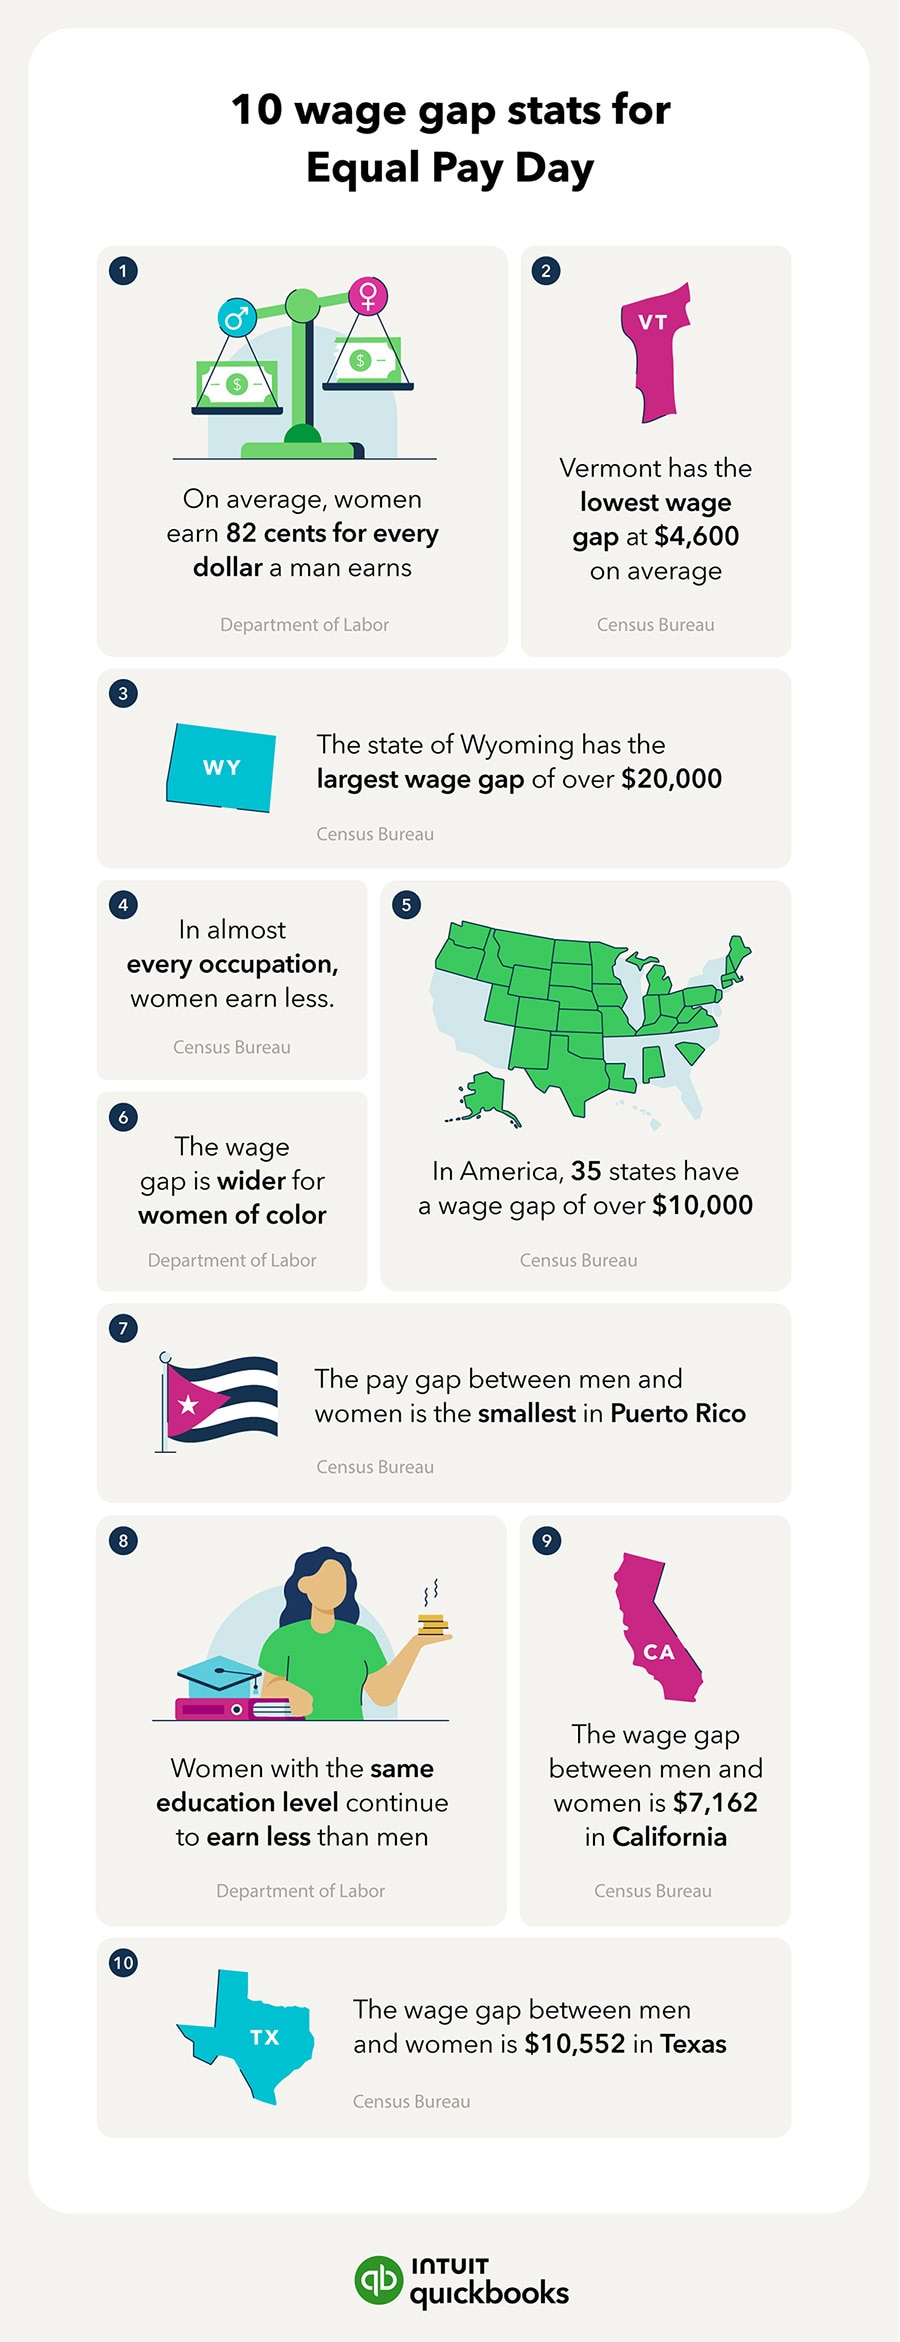 10 wage gap stats for Equal Pay Day